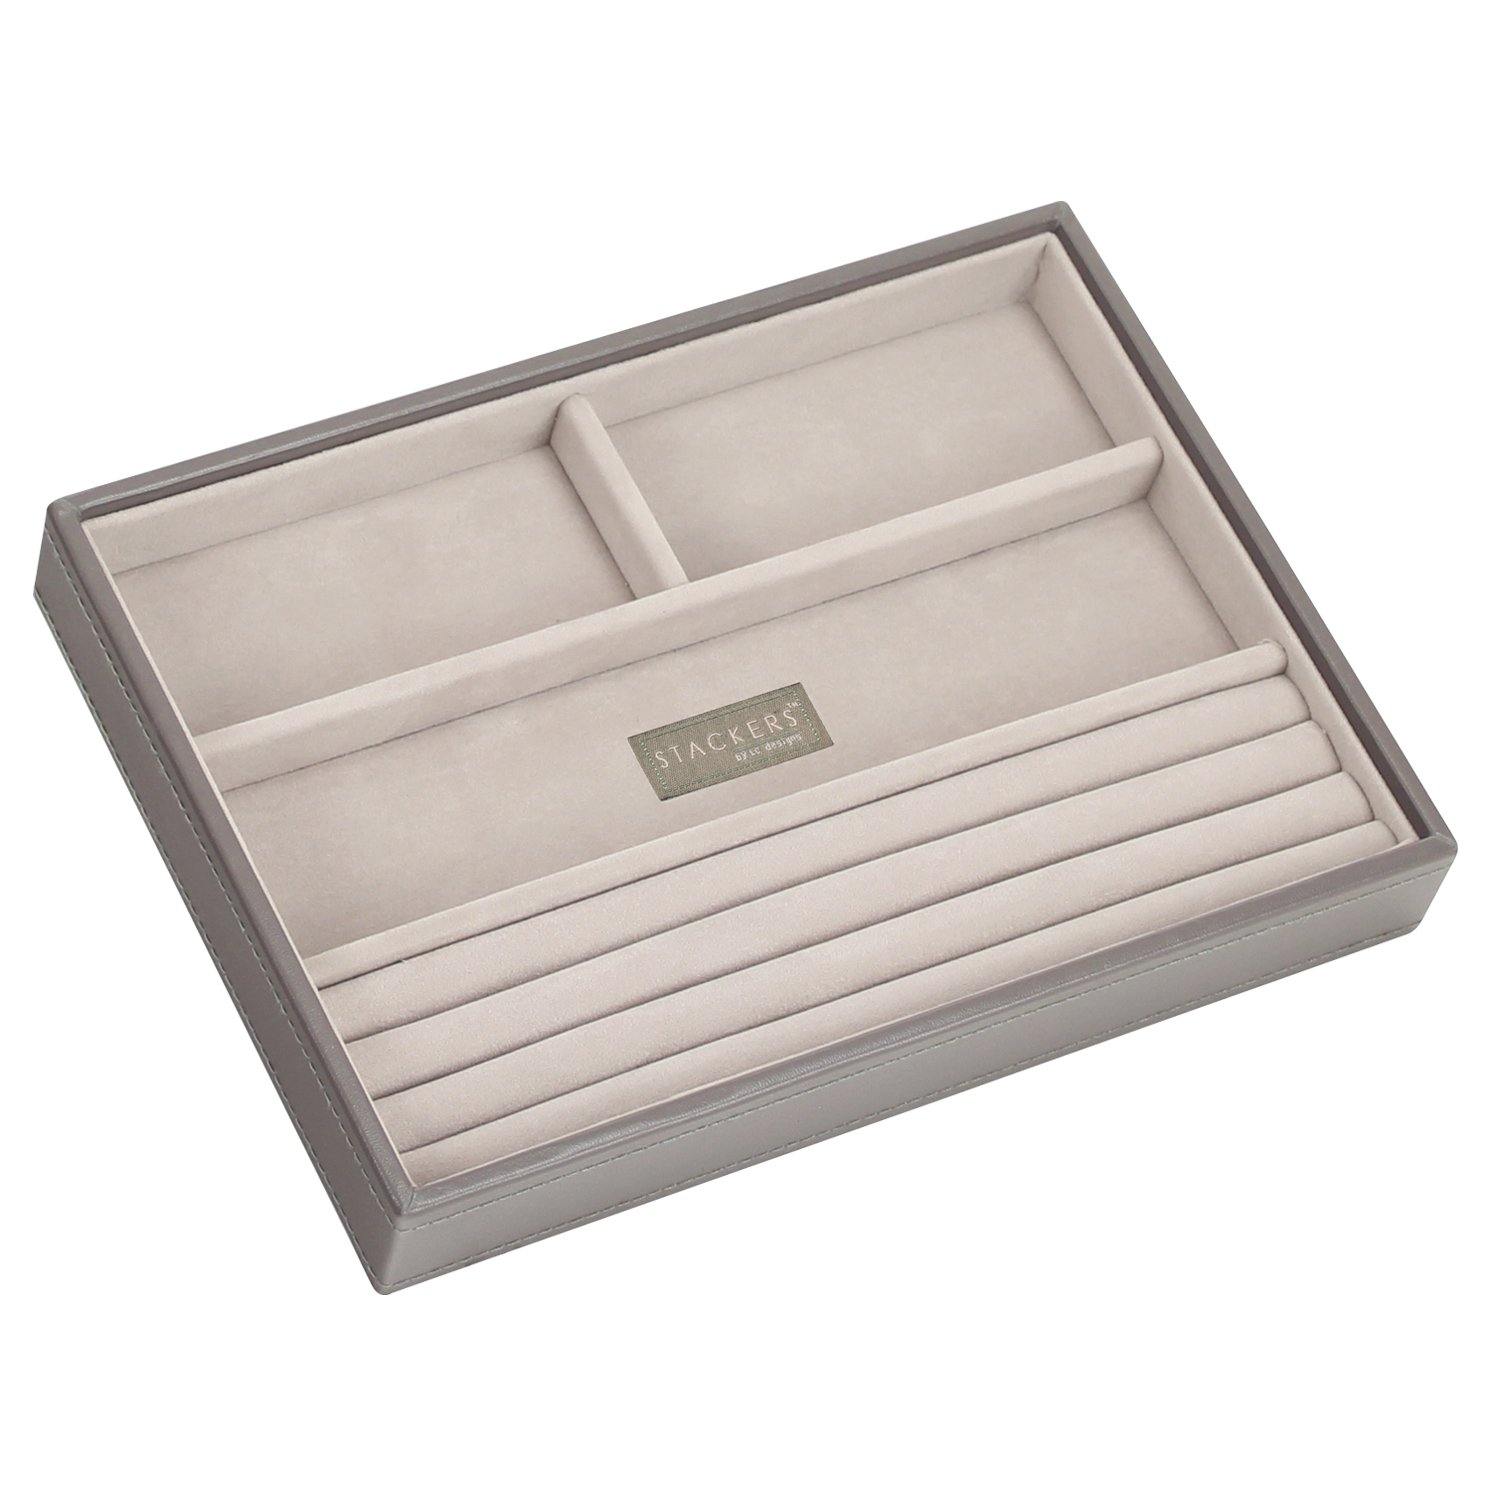 PREMIUM Stackers Mink Jewellery Box Small Compartments